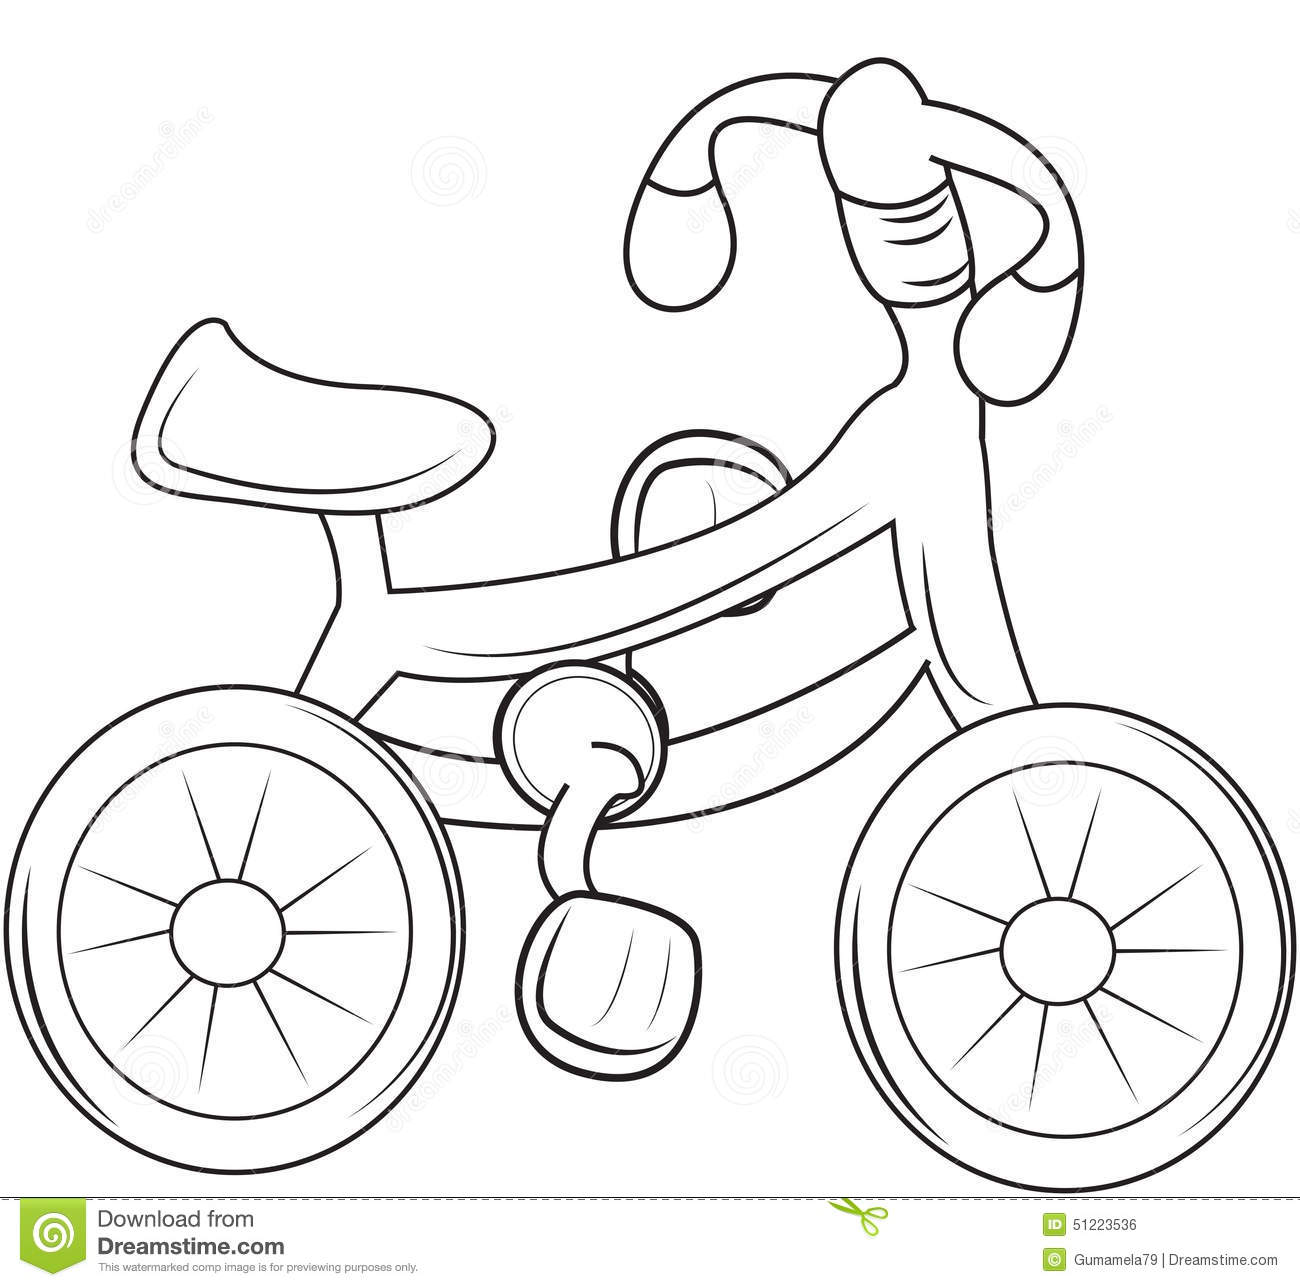 Bicycle coloring pages to download and print for free - jeffersonclan